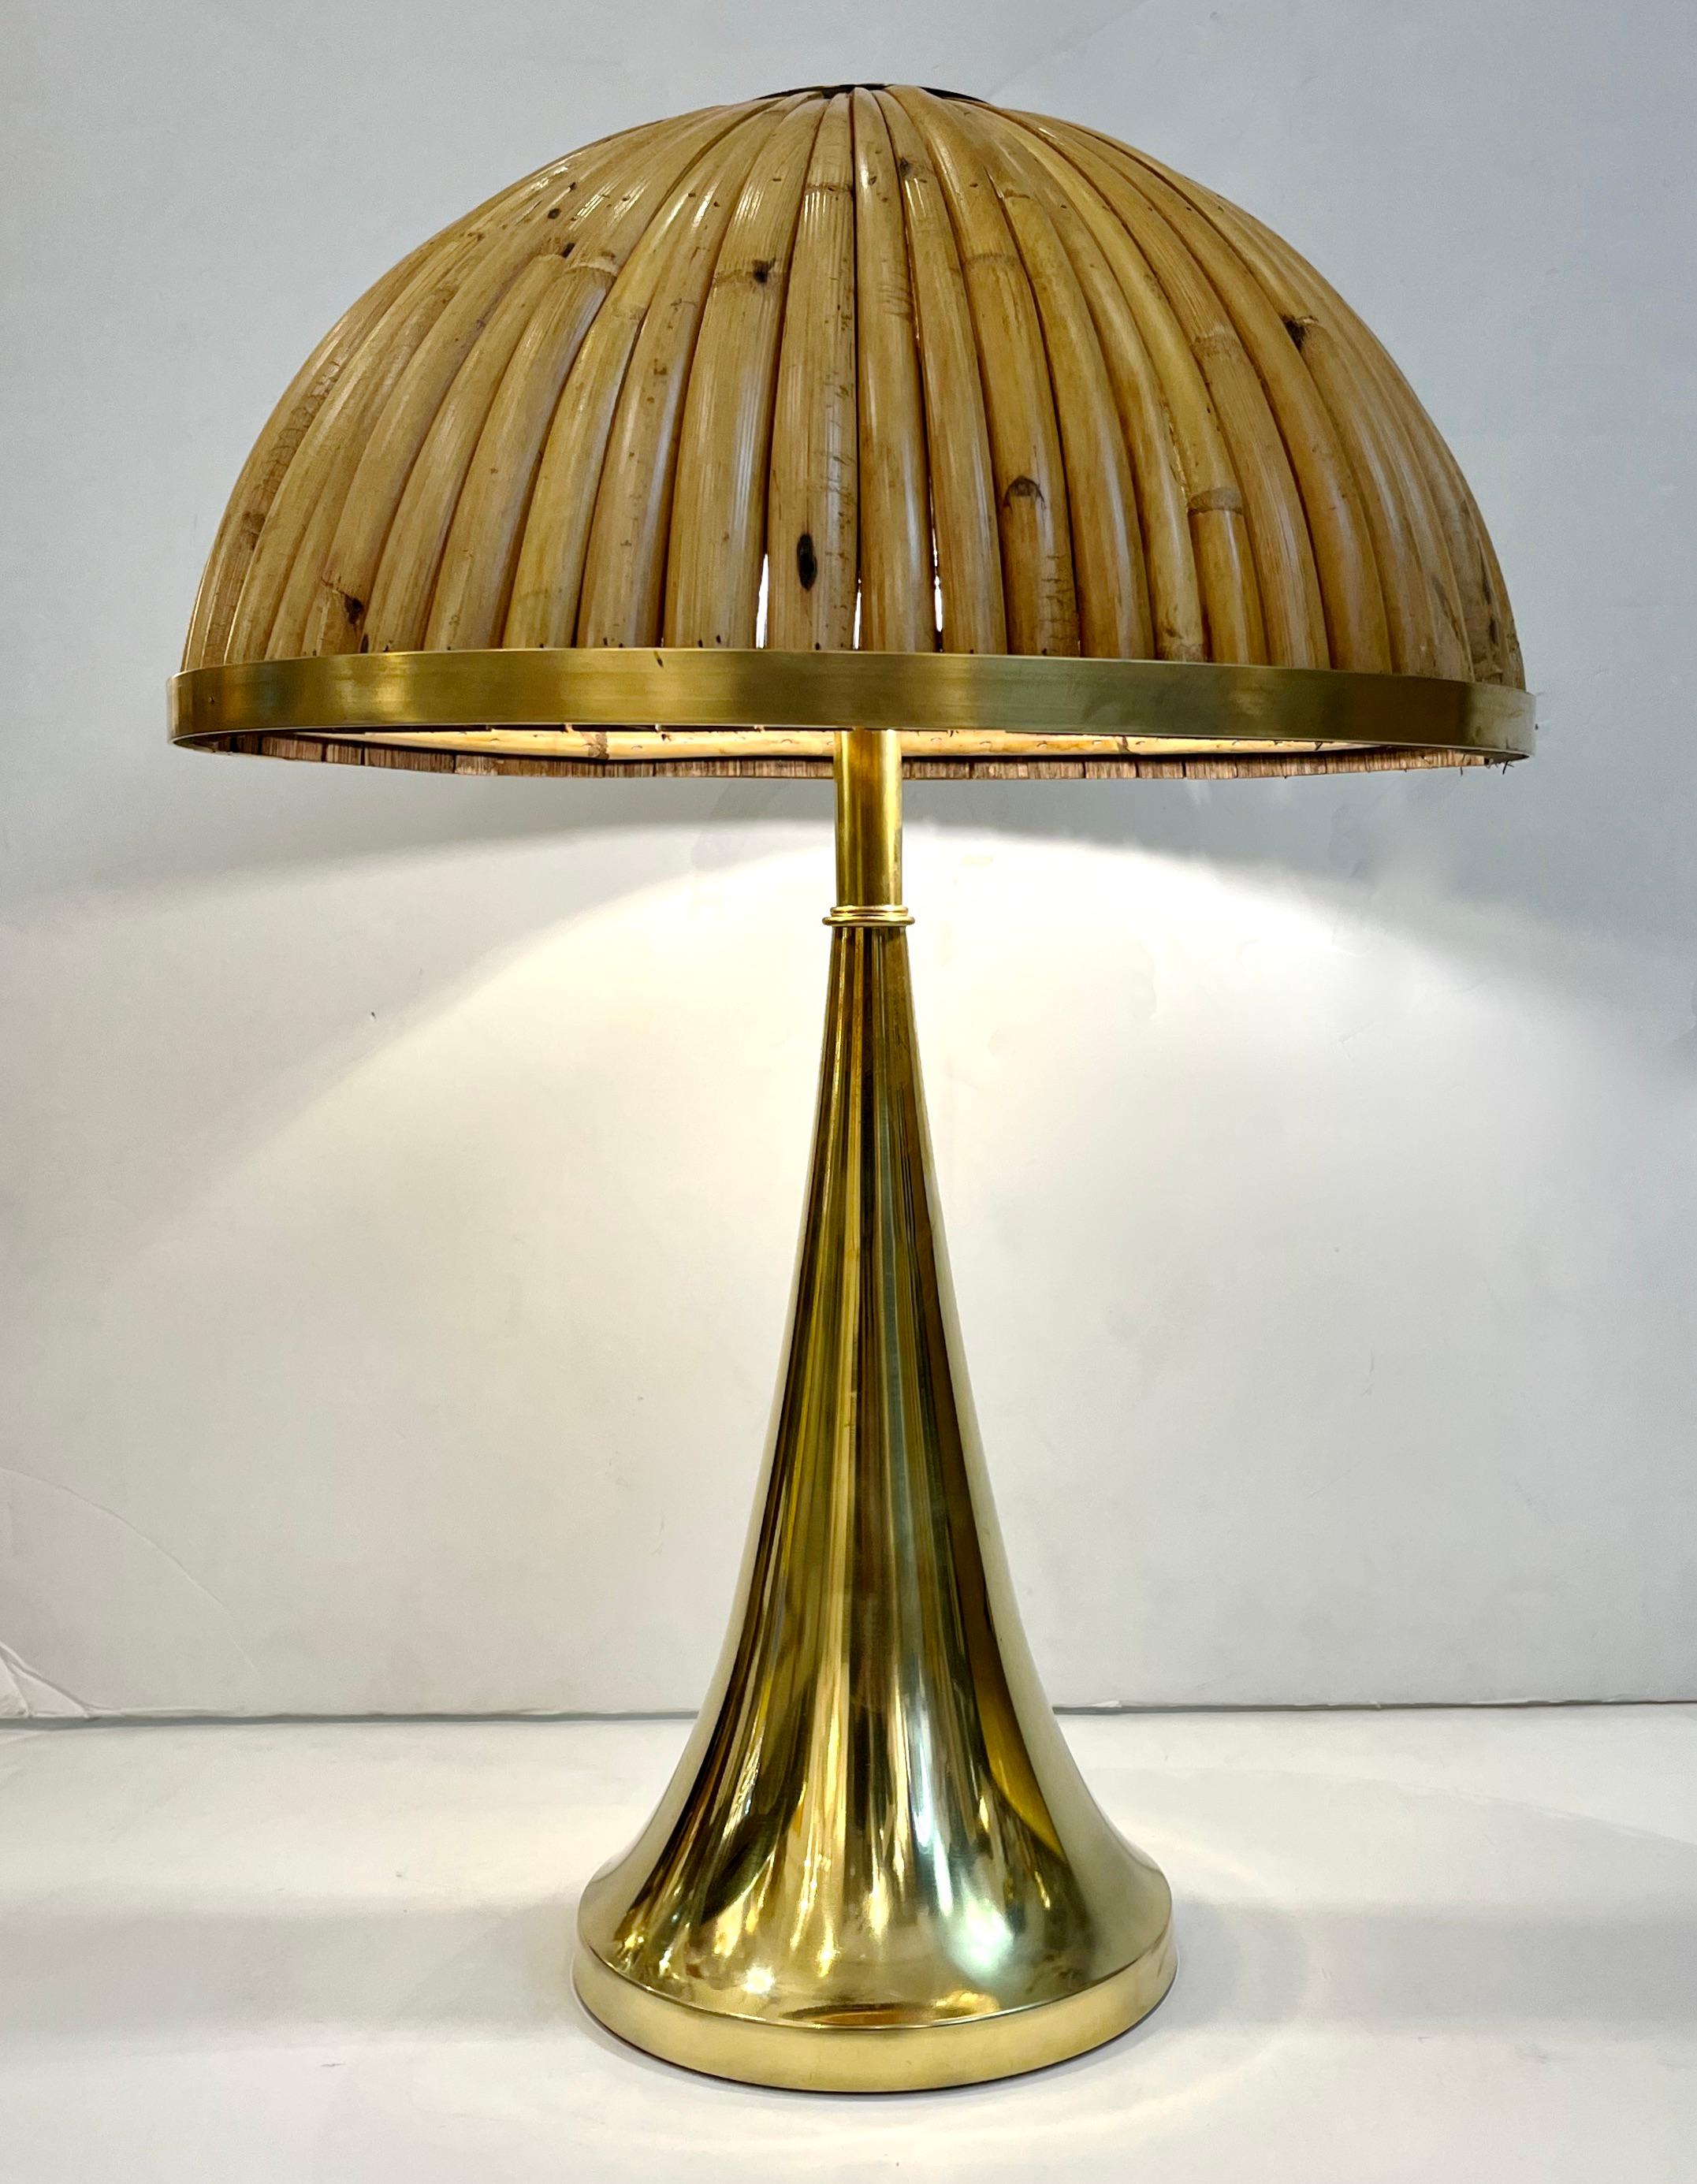 A contemporary organic modern creation, entirely handcrafted in Italy, a pair of sleek organic table lamps, the sensuous luminous brass gold body holding an elegant half moon shade entirely handmade in rattan / bamboo and made special by the edging